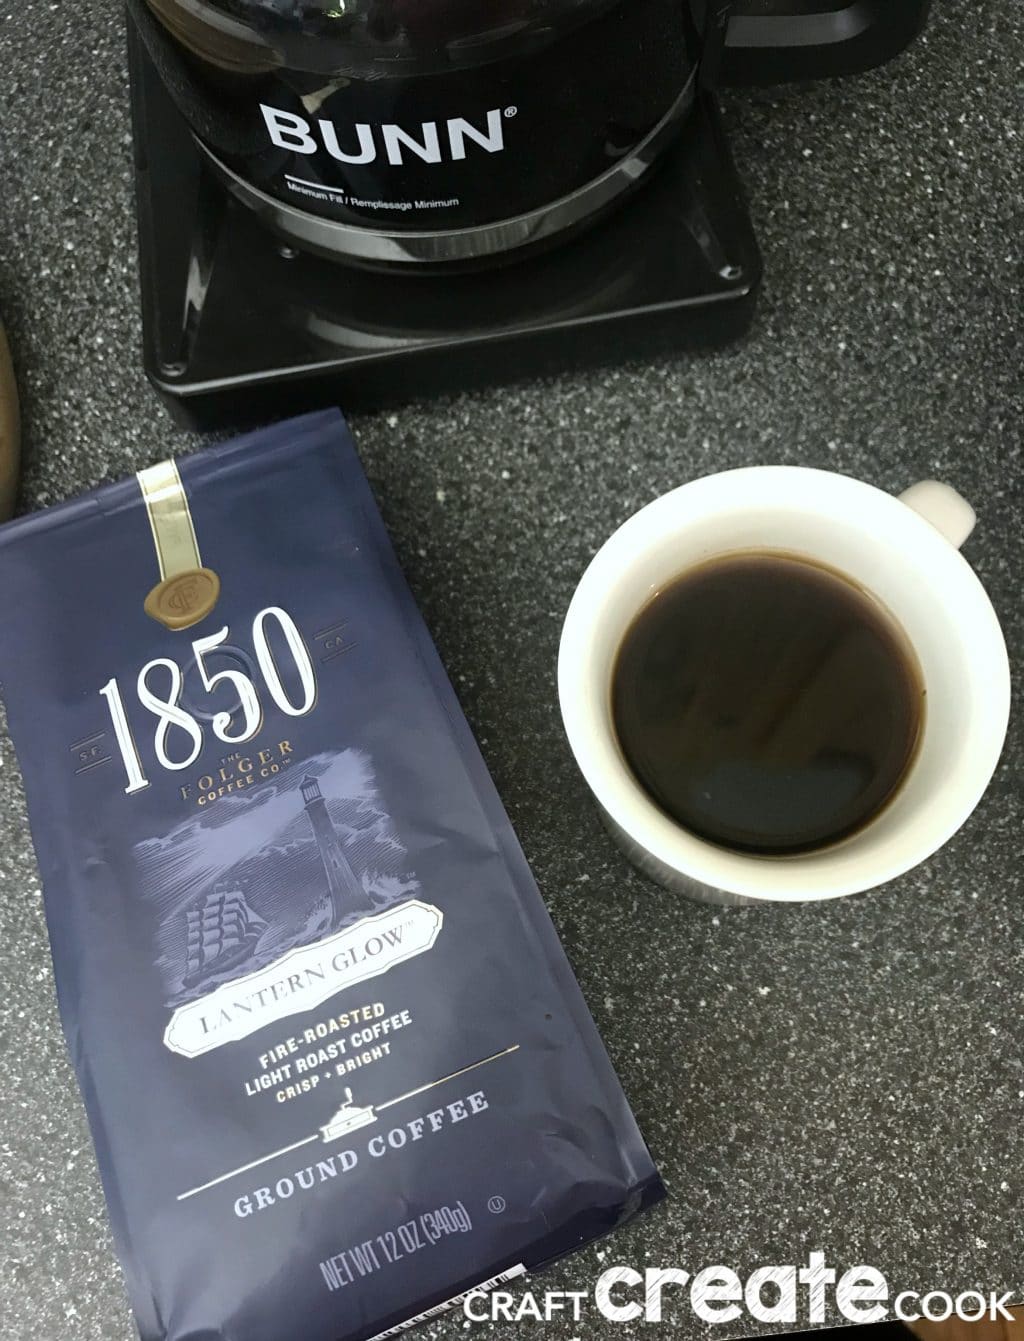 Take a few minutes and enjoy that cup of 1850 Brand Coffee and a few self care tips for moms!